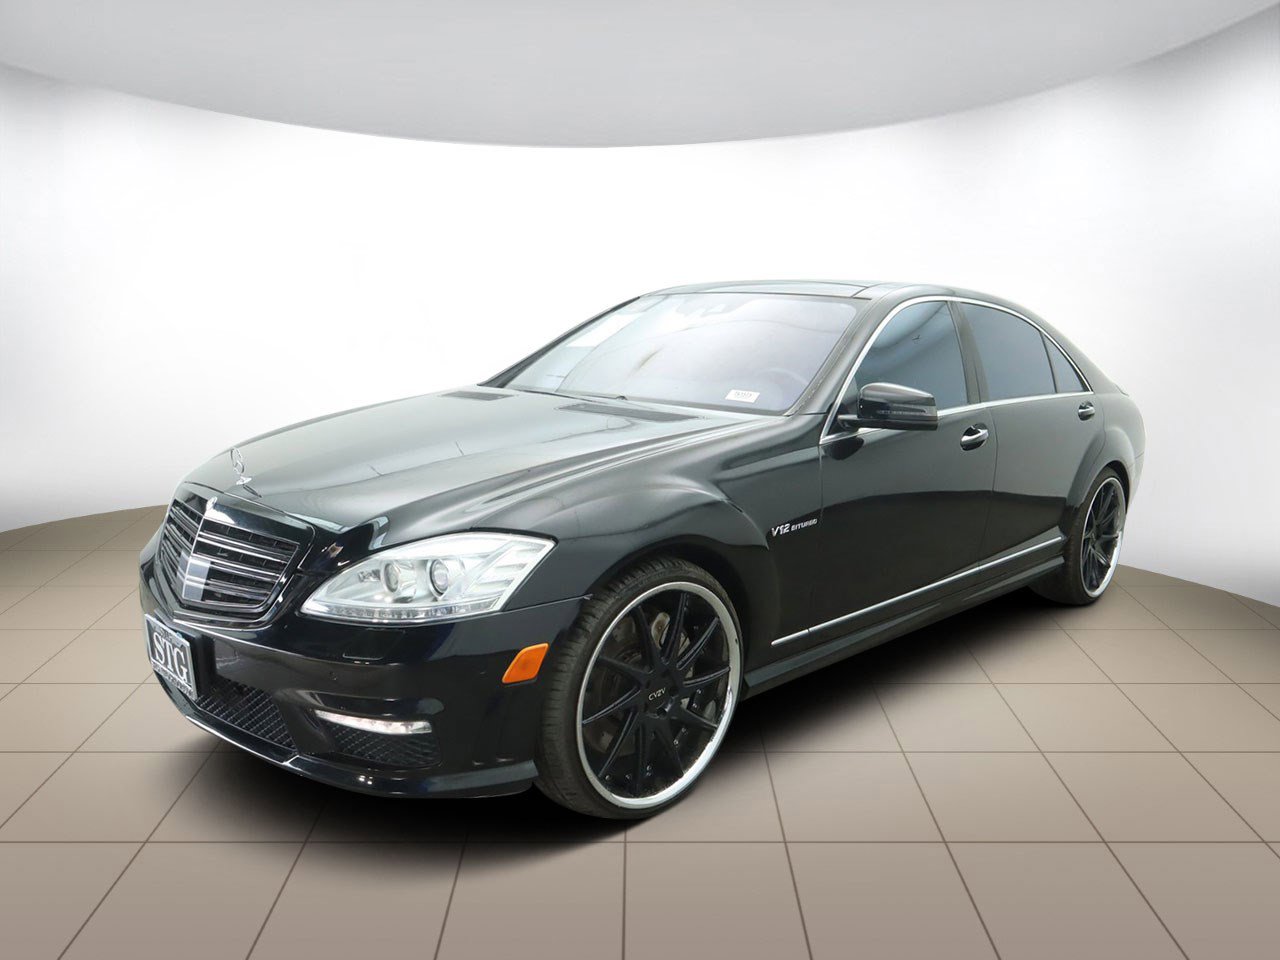 Pre-Owned 2010 Mercedes-Benz S-Class S 65 AMG® Base 4D Sedan in Montclair  #T61573 | STG Auto Group